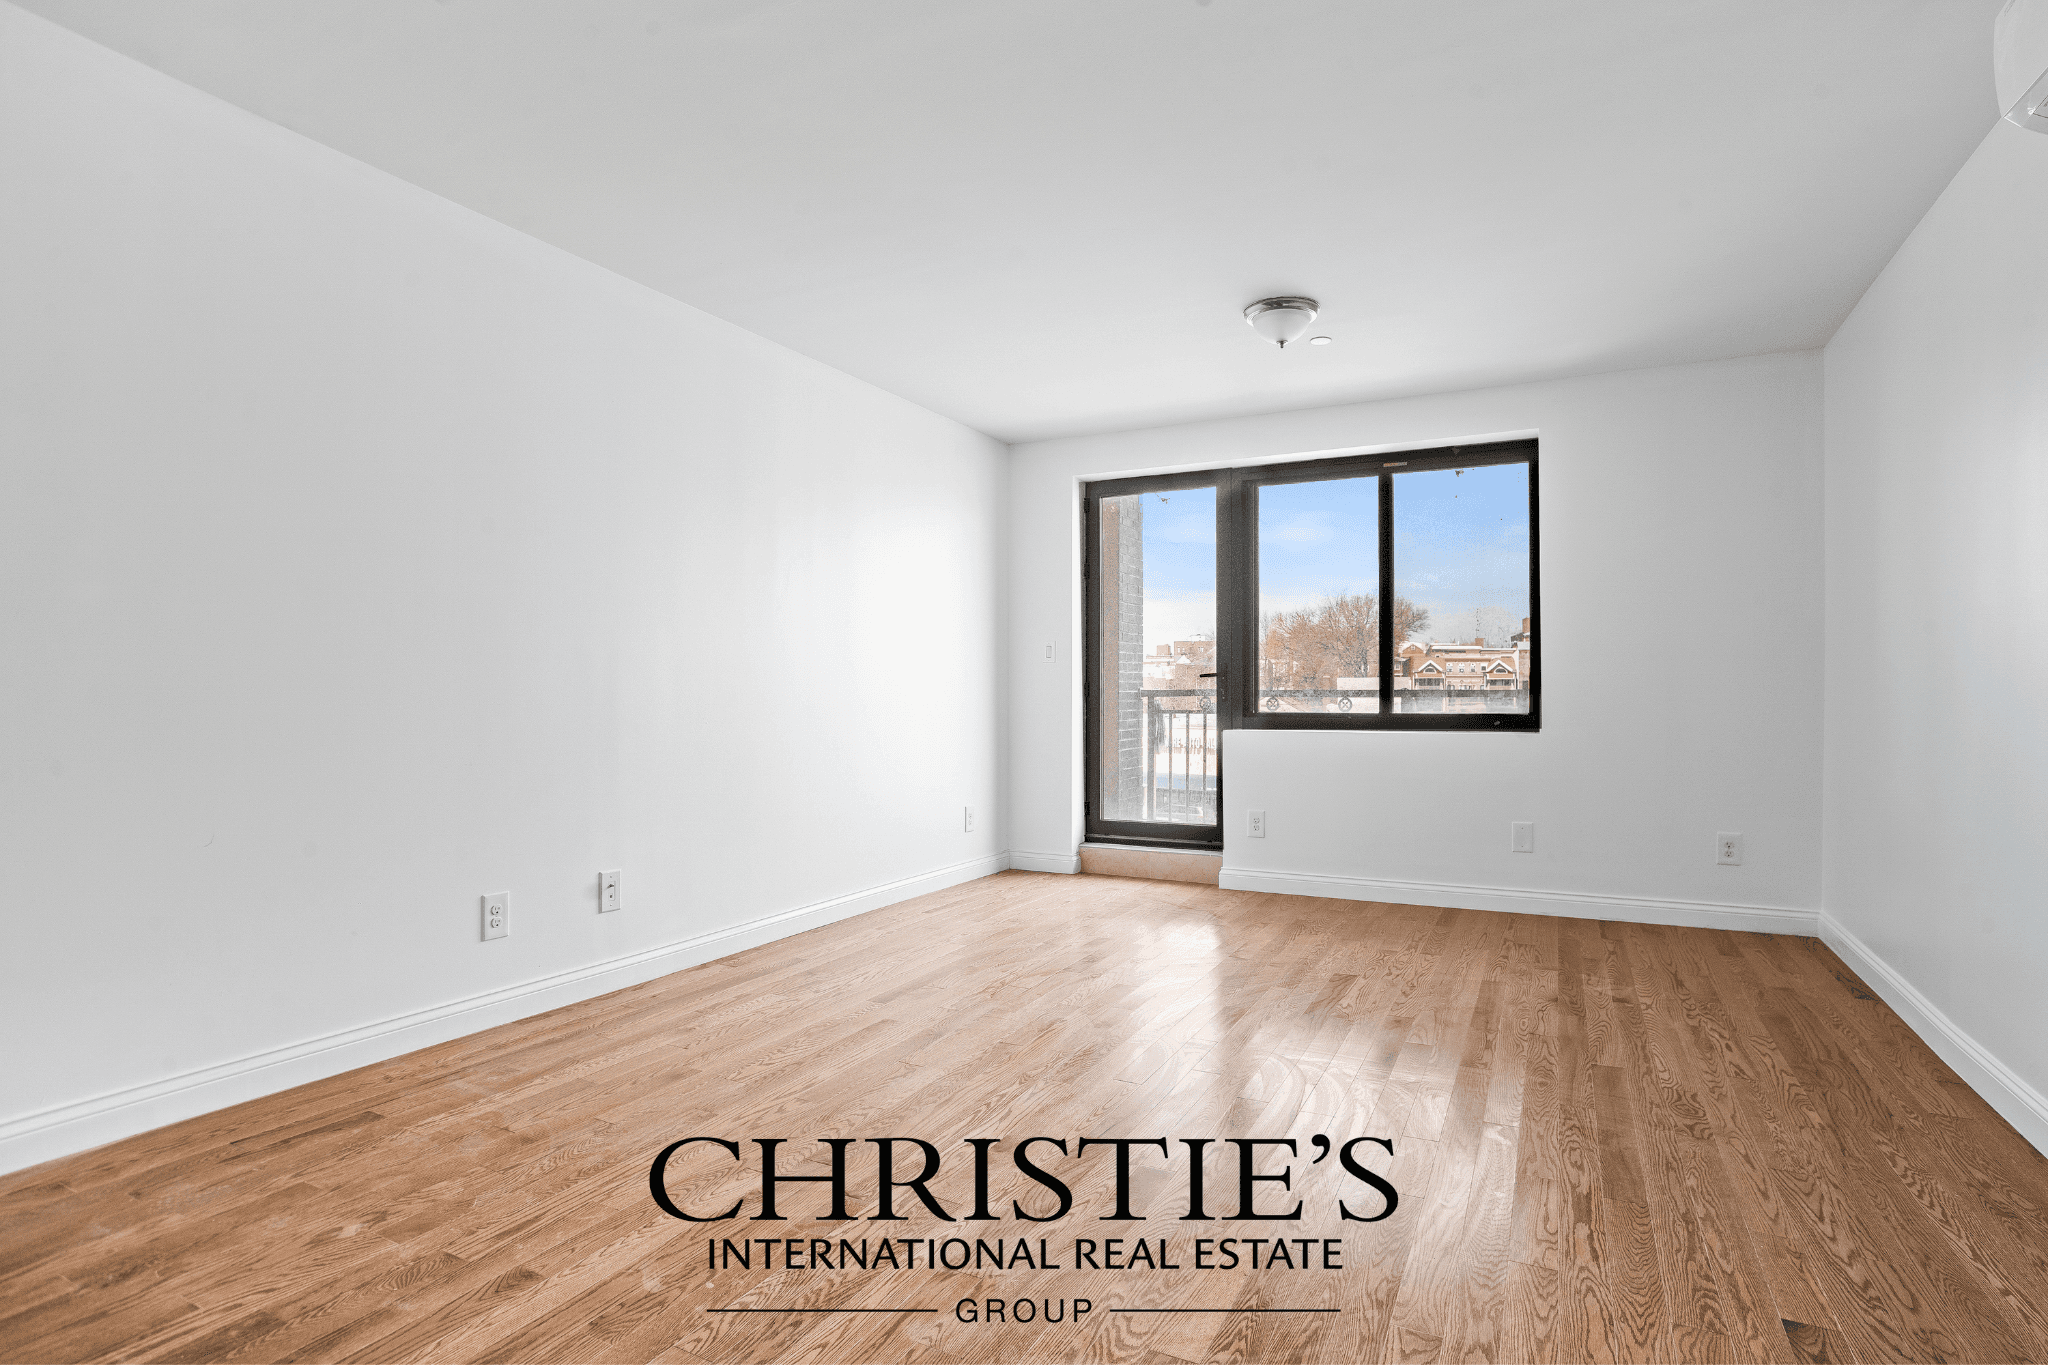 Step into the inviting comfort of this newly built 2 bedroom, 2 bathroom apartment located in the vibrant neighborhood of Woodside.